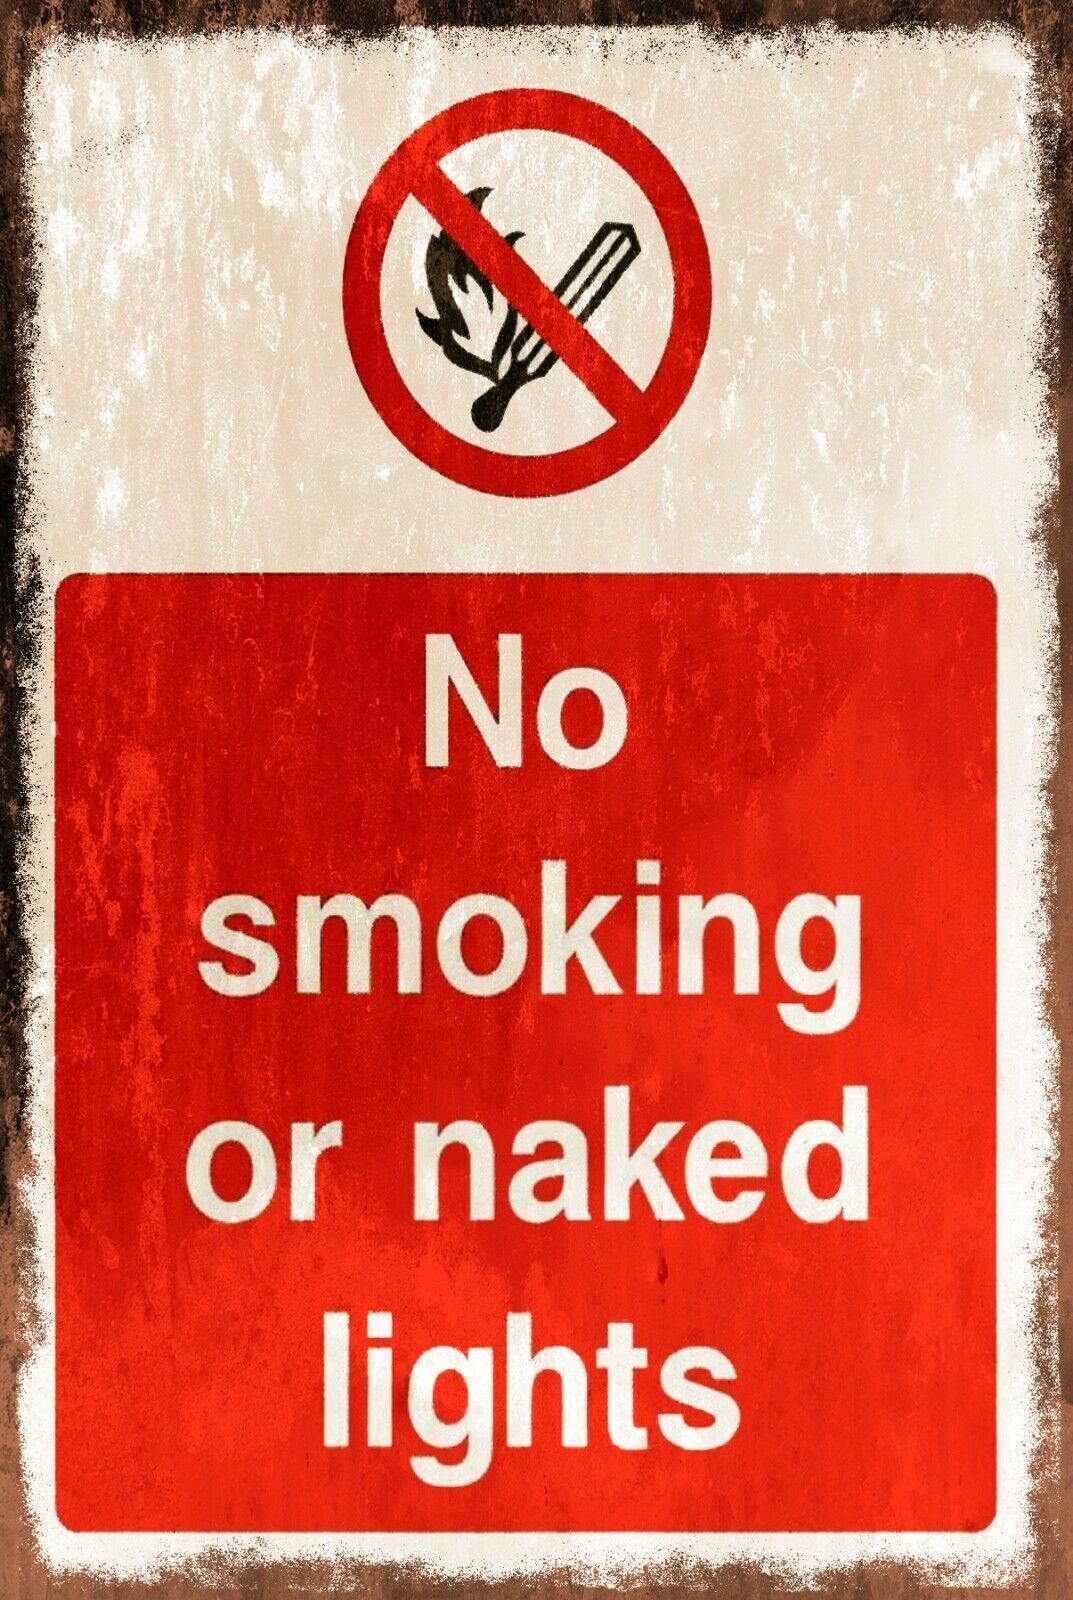 No Smoking or Naked Lights, Funny Aged Look Vintage Style Metal Warning  Sign | eBay